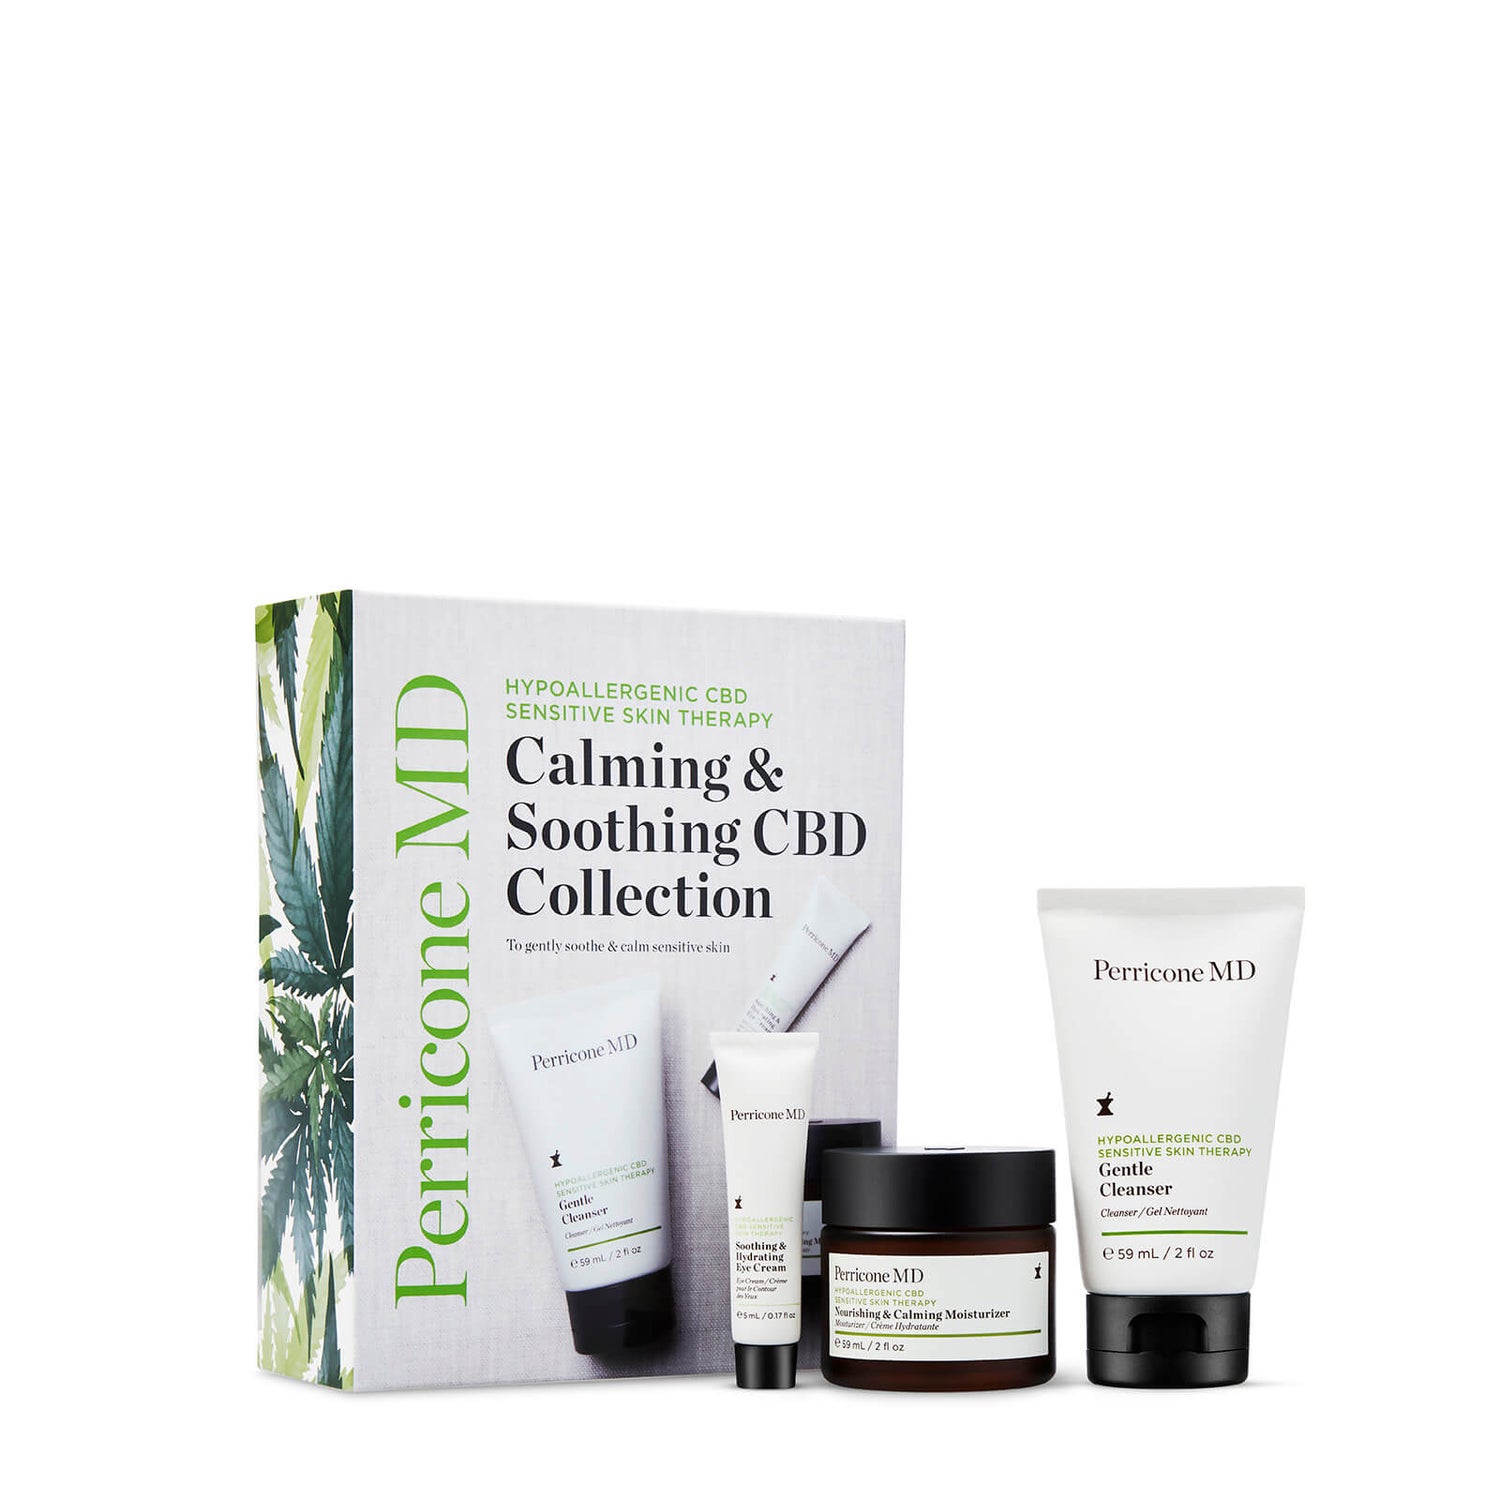 Hypoallergenic Calming & Soothing CBD Collection (dal valore di 136€)